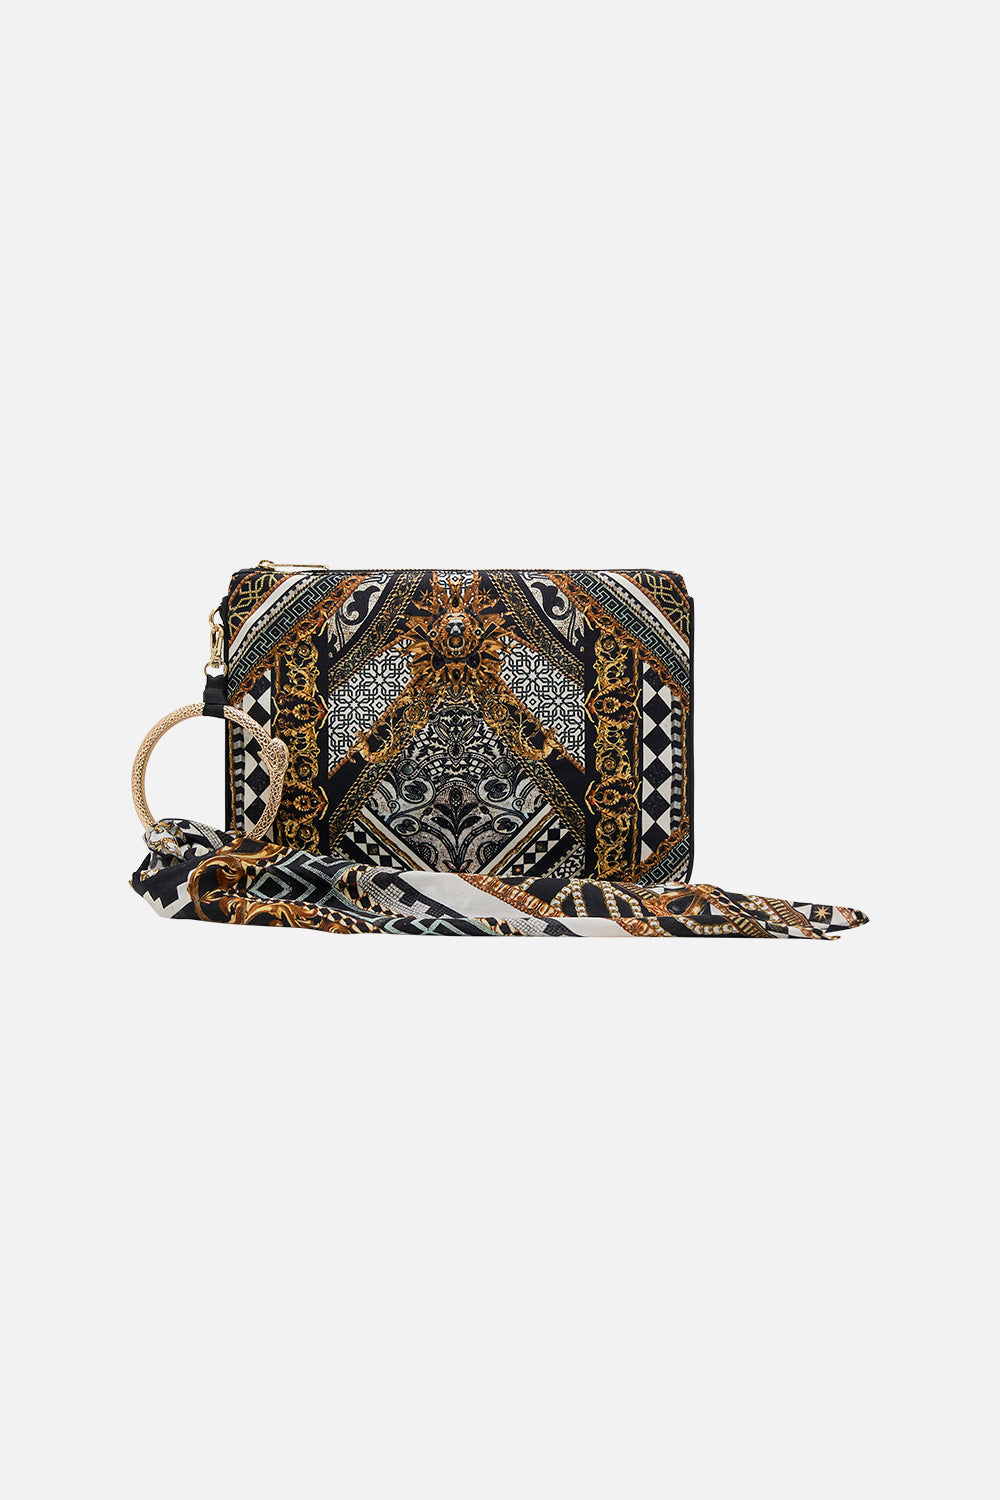 Product view of CAMILLA scarf clutch in Look Up Tesoro print